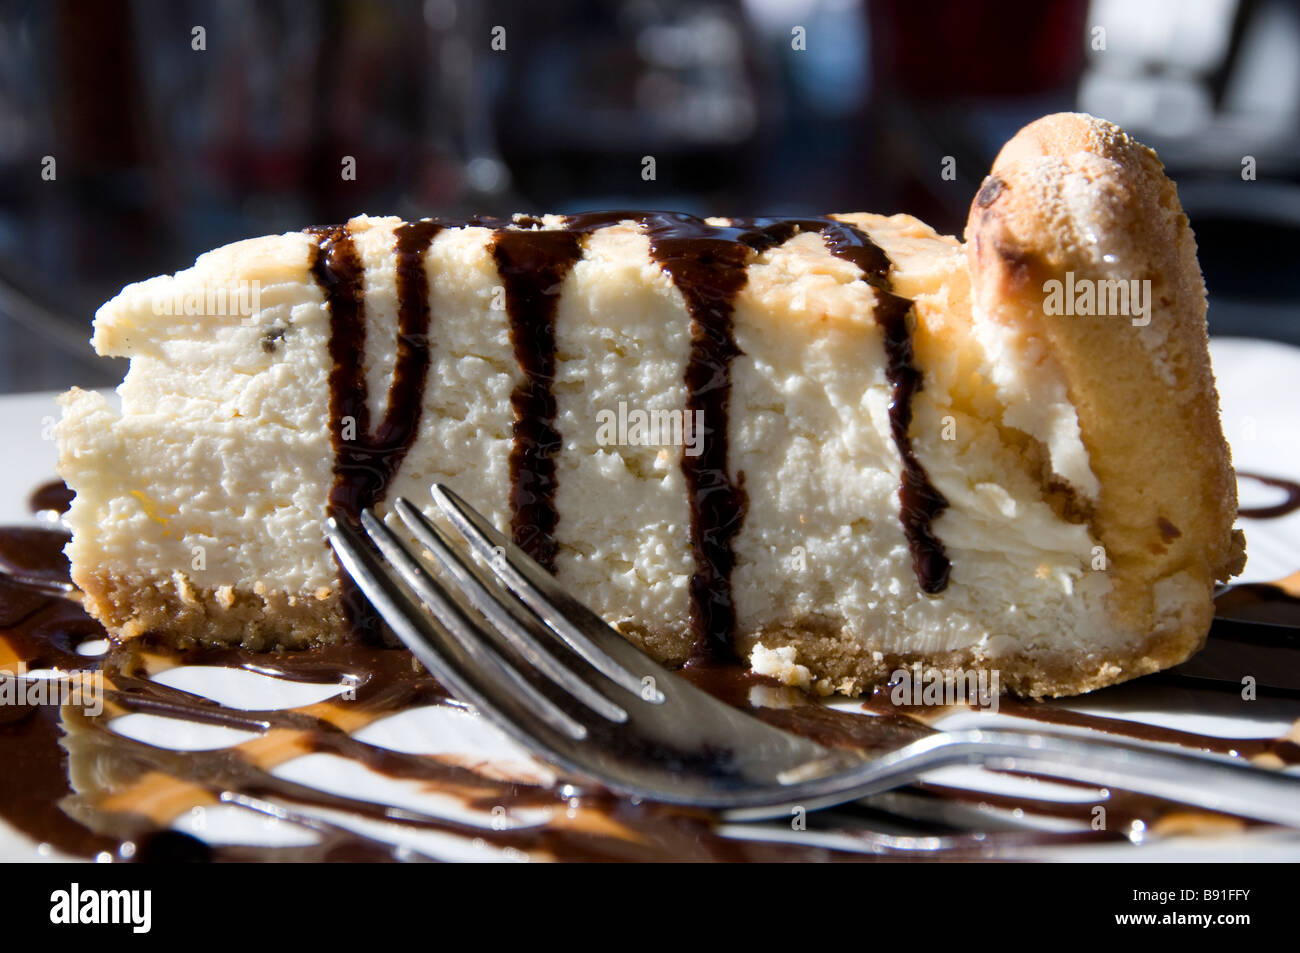 Slice of cheesecake on plate with chocolate syrup Stock Photo